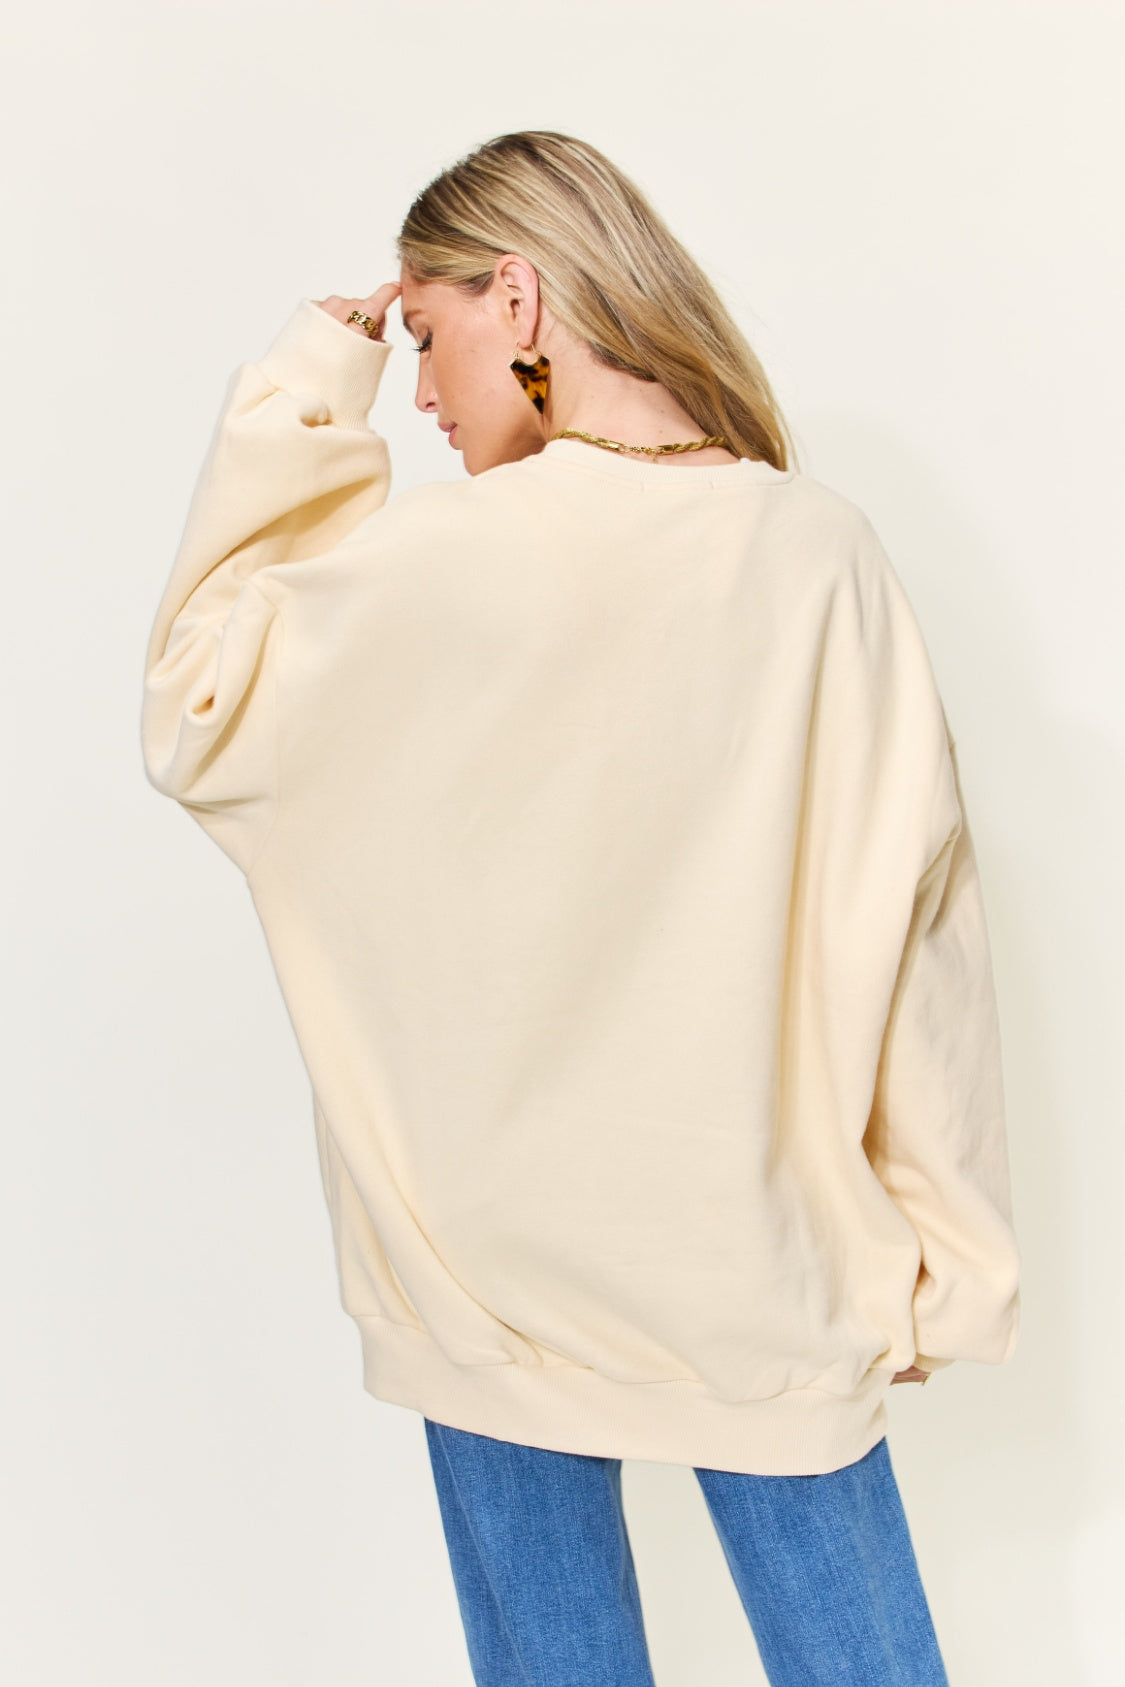 Simply Love Full Size YOU ARE ENOUGH Drop Shoulder Oversized Sweatshirt - Tigbuls Variety Fashion